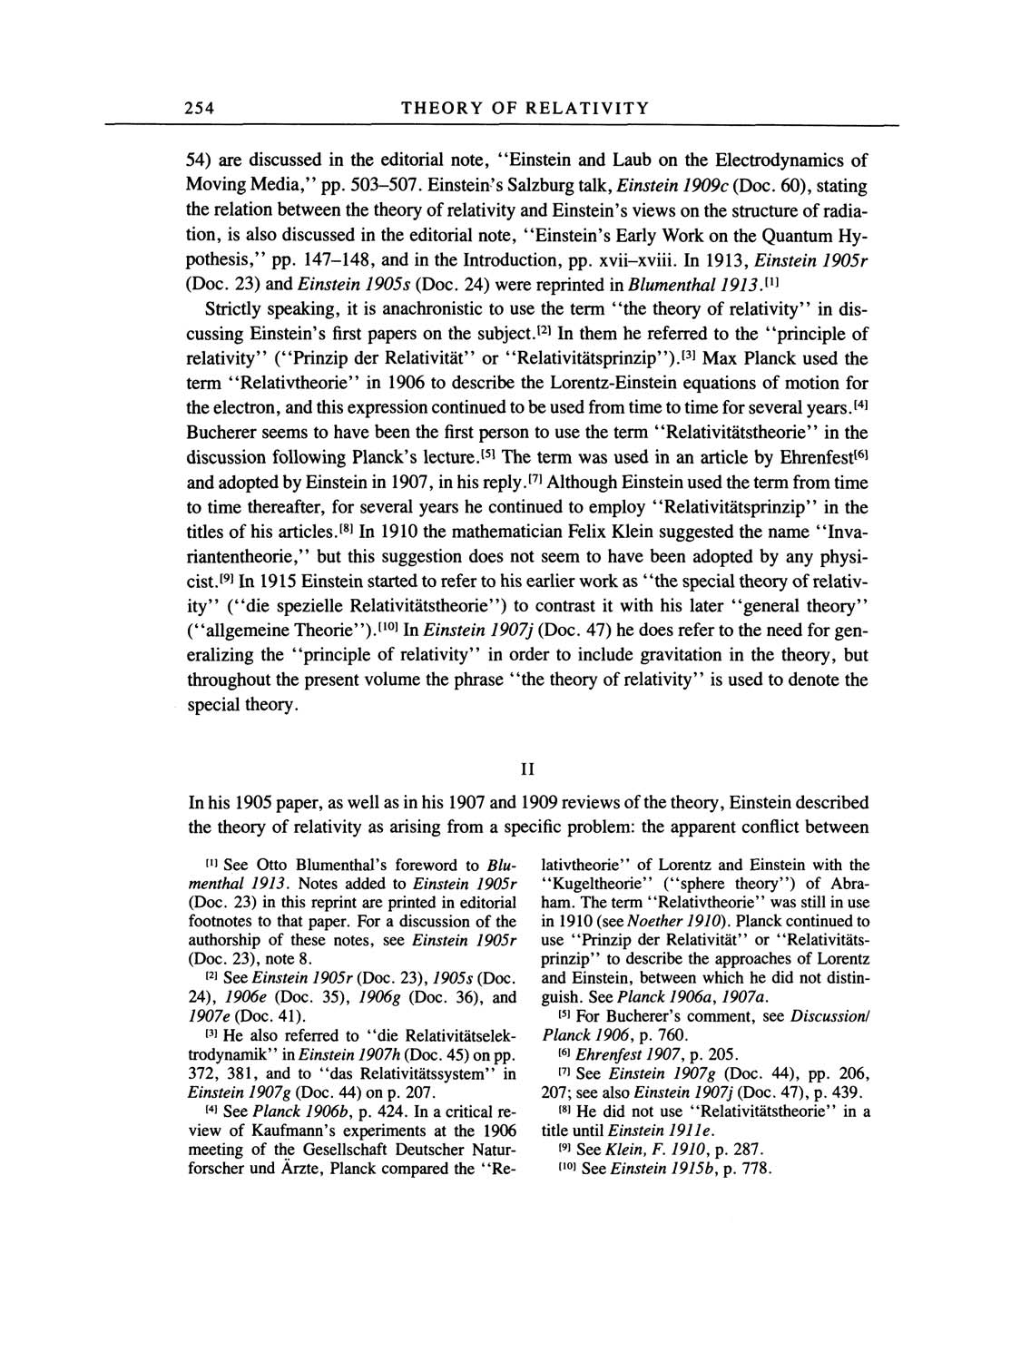 Volume 2: The Swiss Years: Writings, 1900-1909 page 254